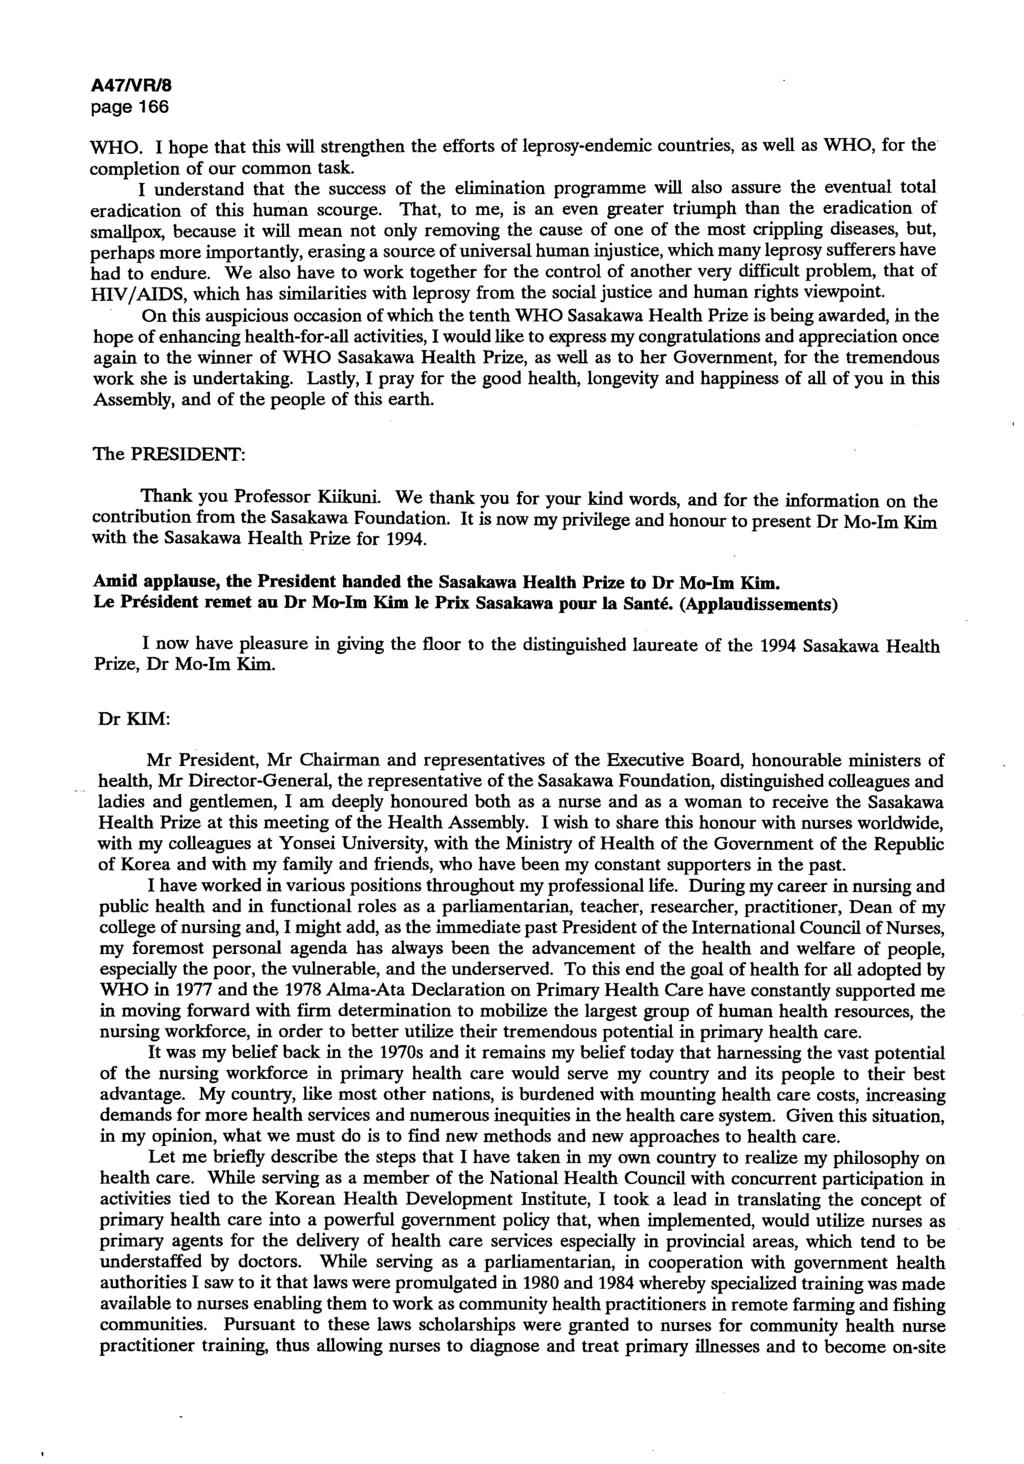 A47/VR/7 page 166 WHO. I hope that this will strengthen the efforts of leprosy-endemic countries, as well as WHO, for the completion of our common task.